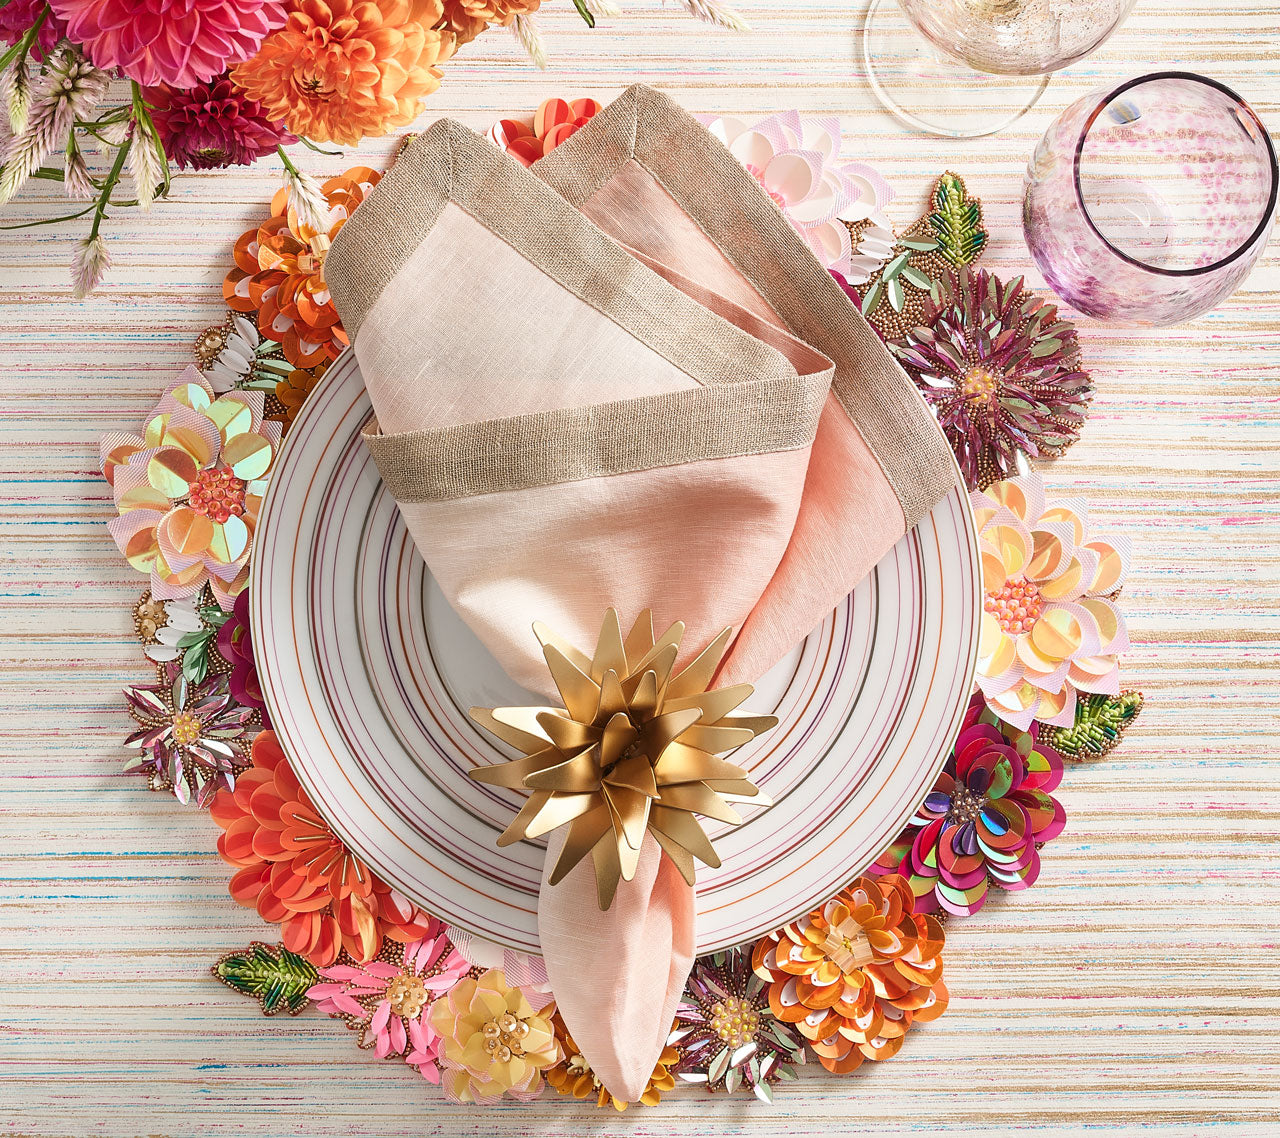 Floral Dahlia Placemat in shades of pink, amethyst, and orange beneath a plate and pink ombre napkin